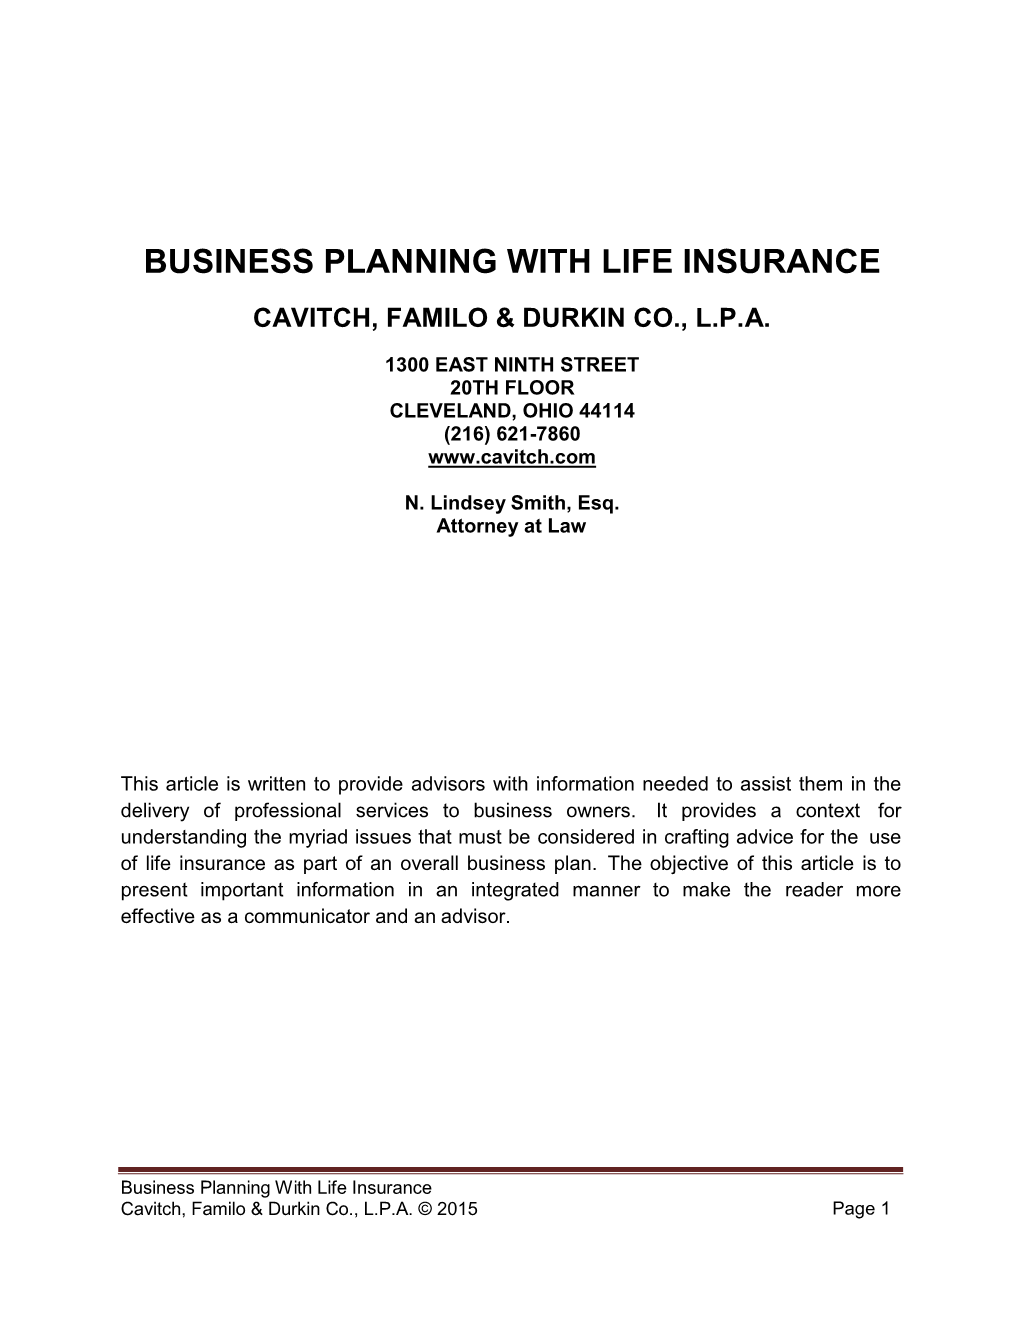 Business Planning with Life Insurance Cavitch, Familo & Durkin Co., L.P.A